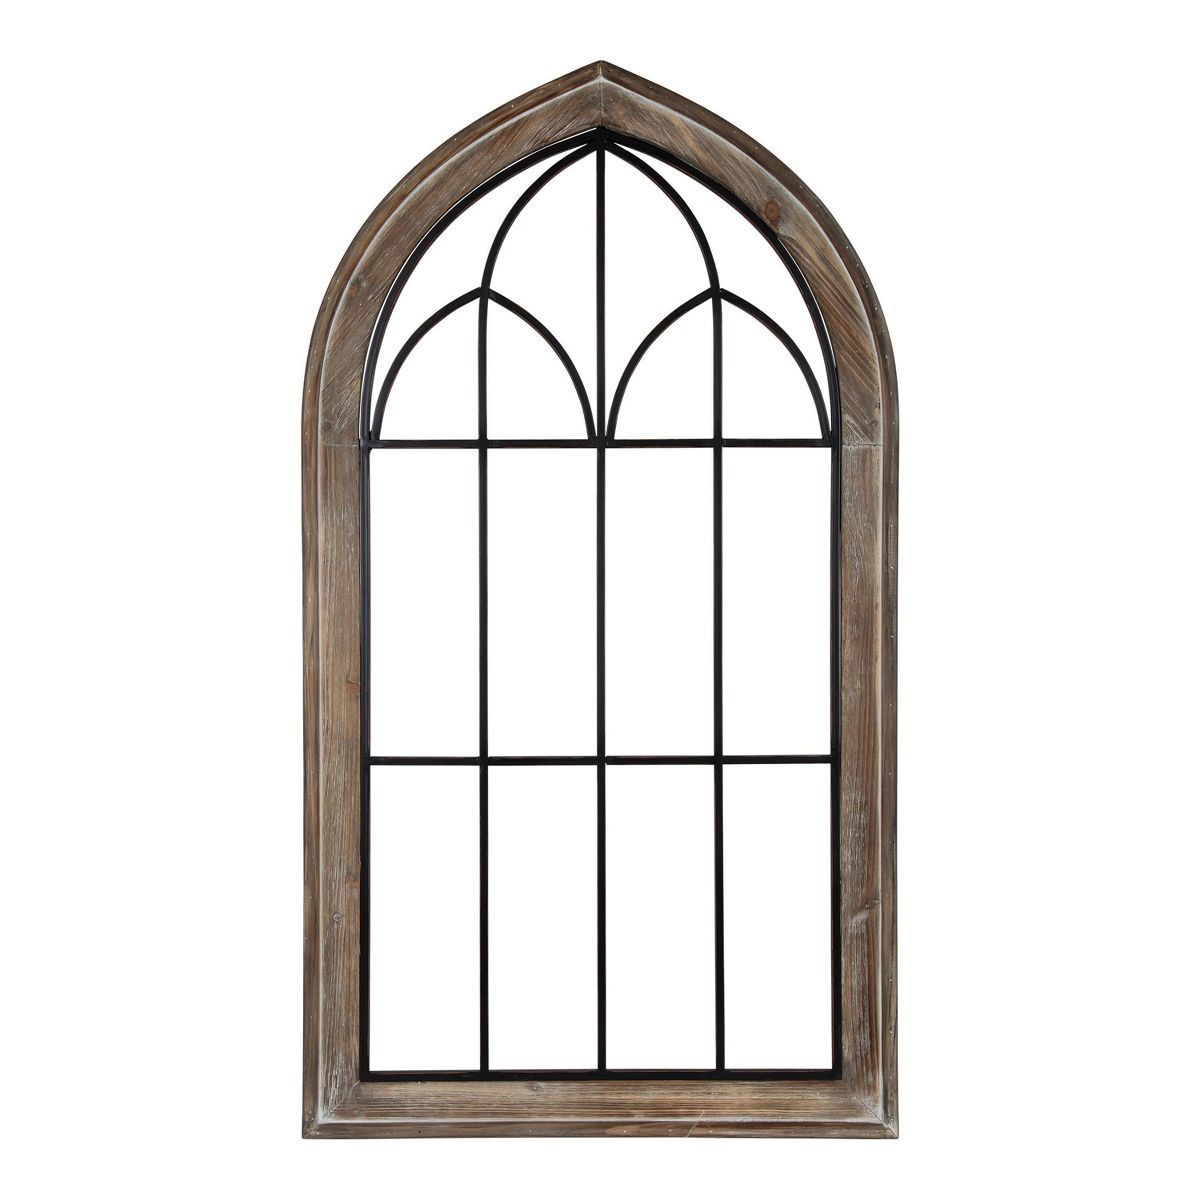 27" x 48" Rennel Window Pane Arch Wall Decor Rustic Brown - Kate and Laurel | Target